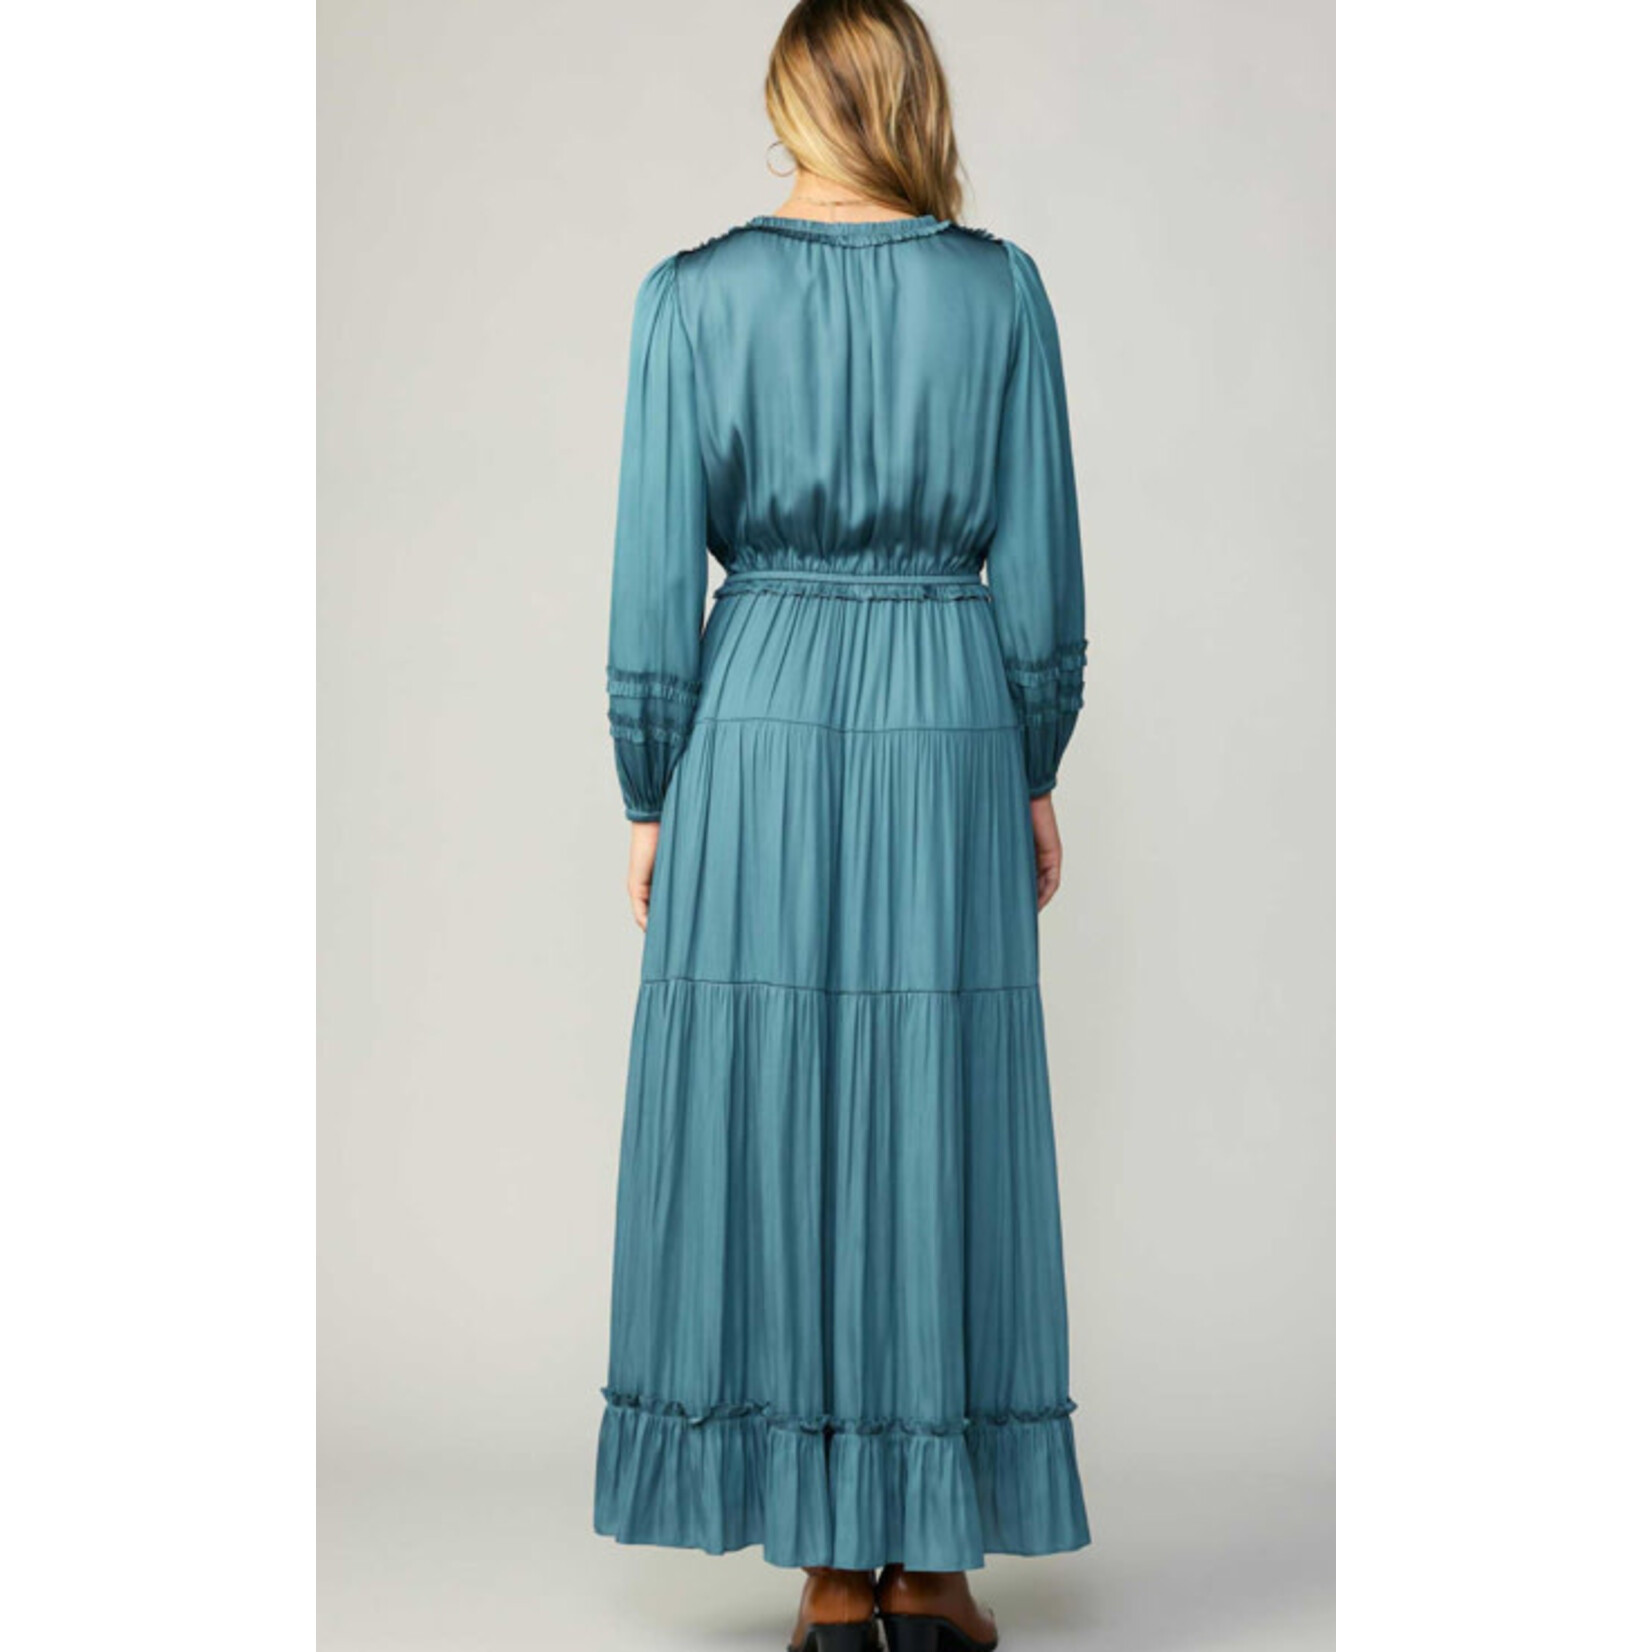 Current Air The Cooper Dress